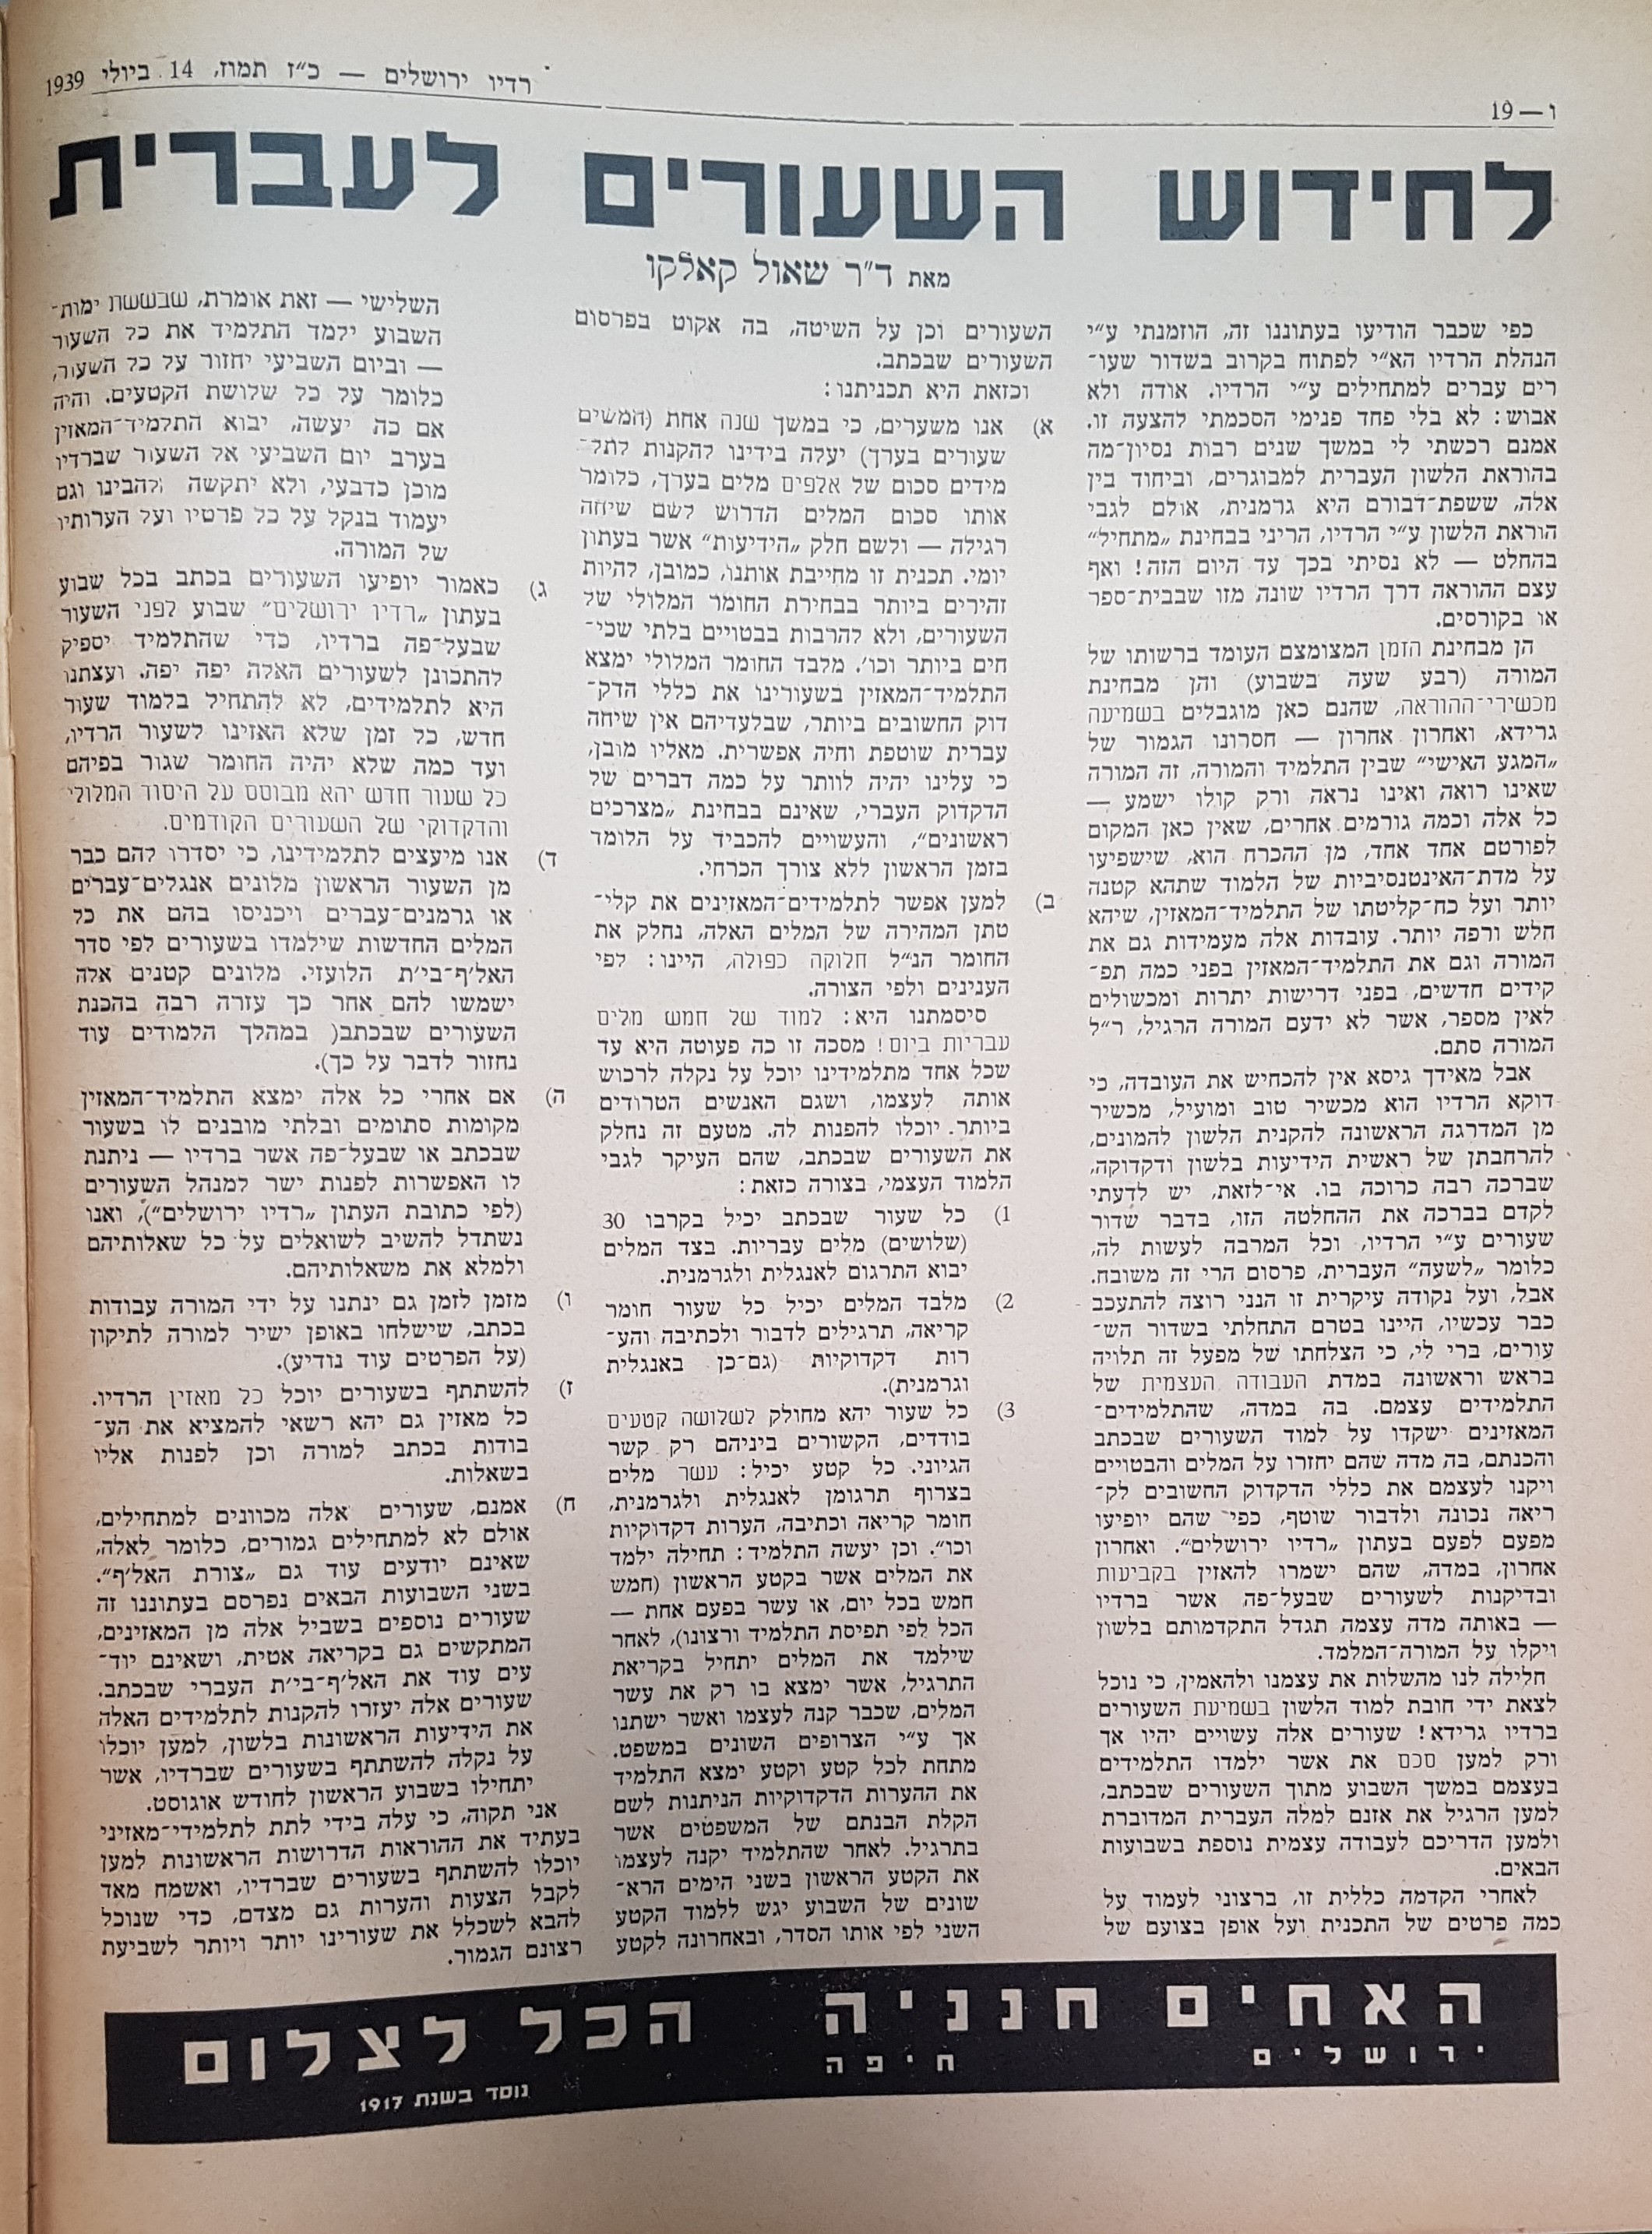 Article by Shaul Kaleko on the new series of Elementary Hebrew